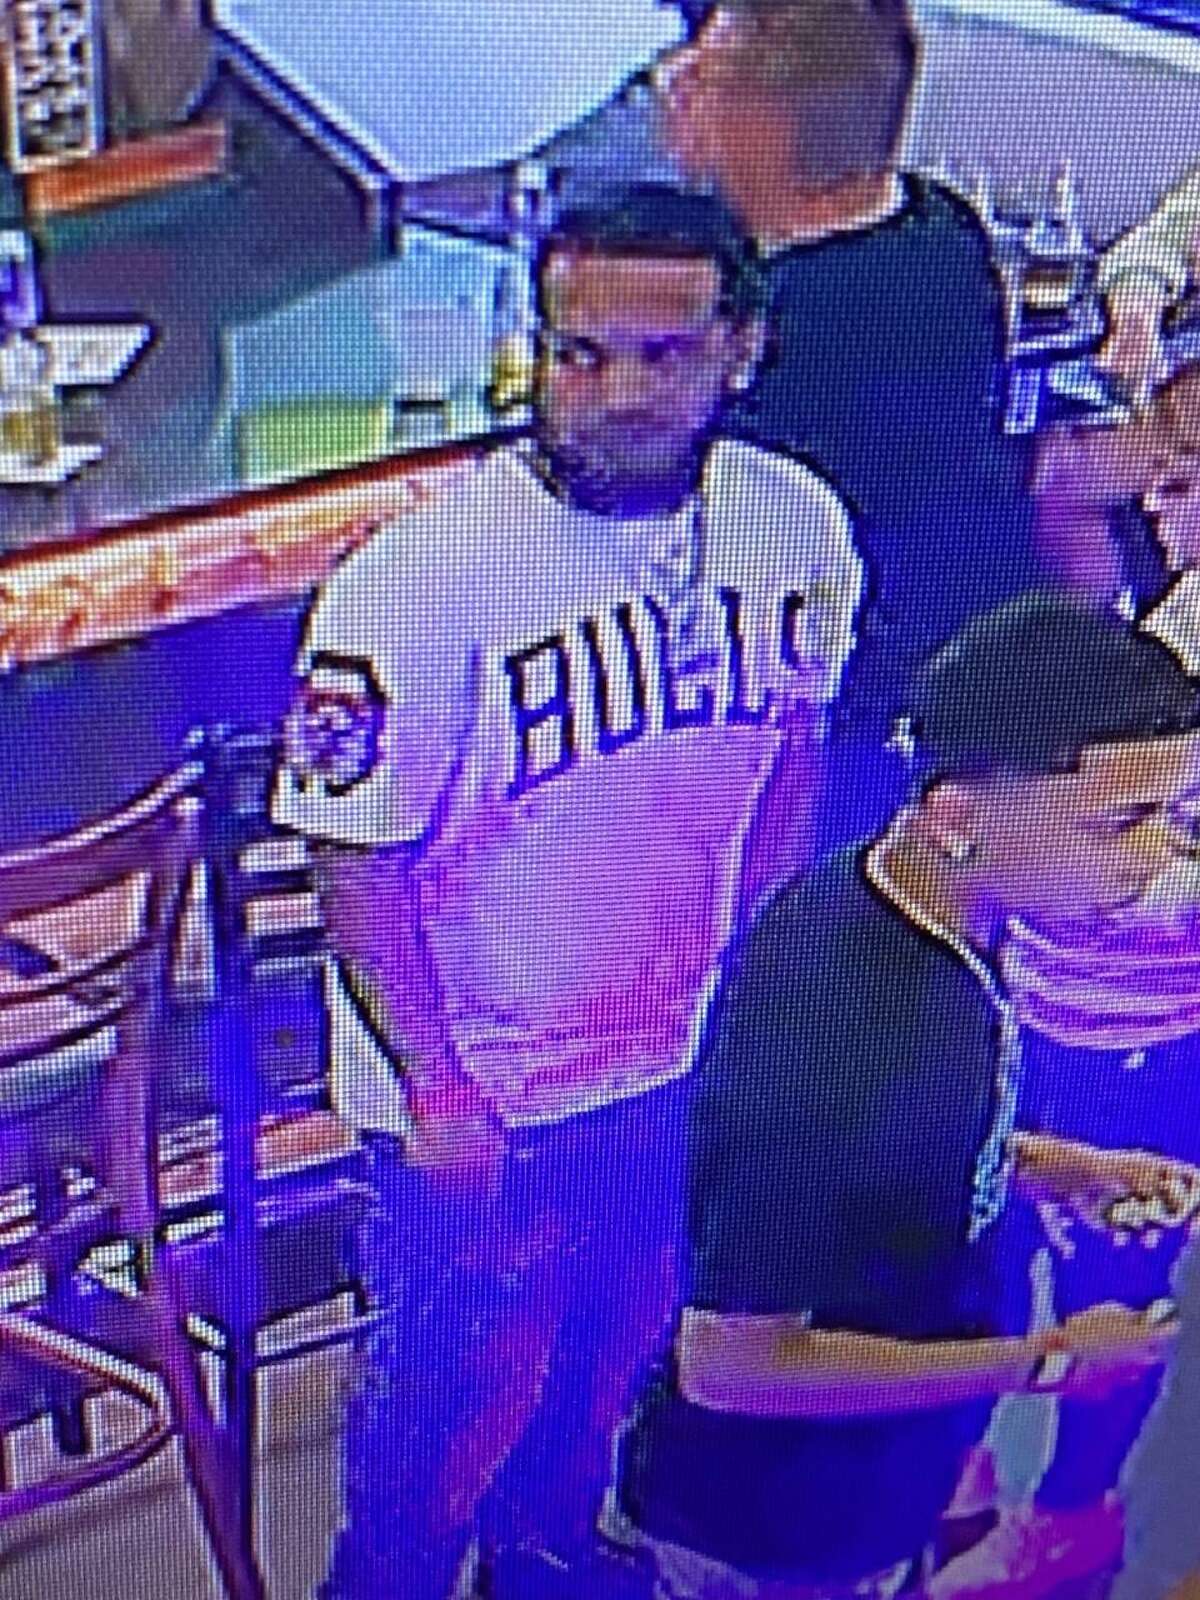 East Haven Police are asking for the public’s help in identifying shooters from an incident on Oct. 10.